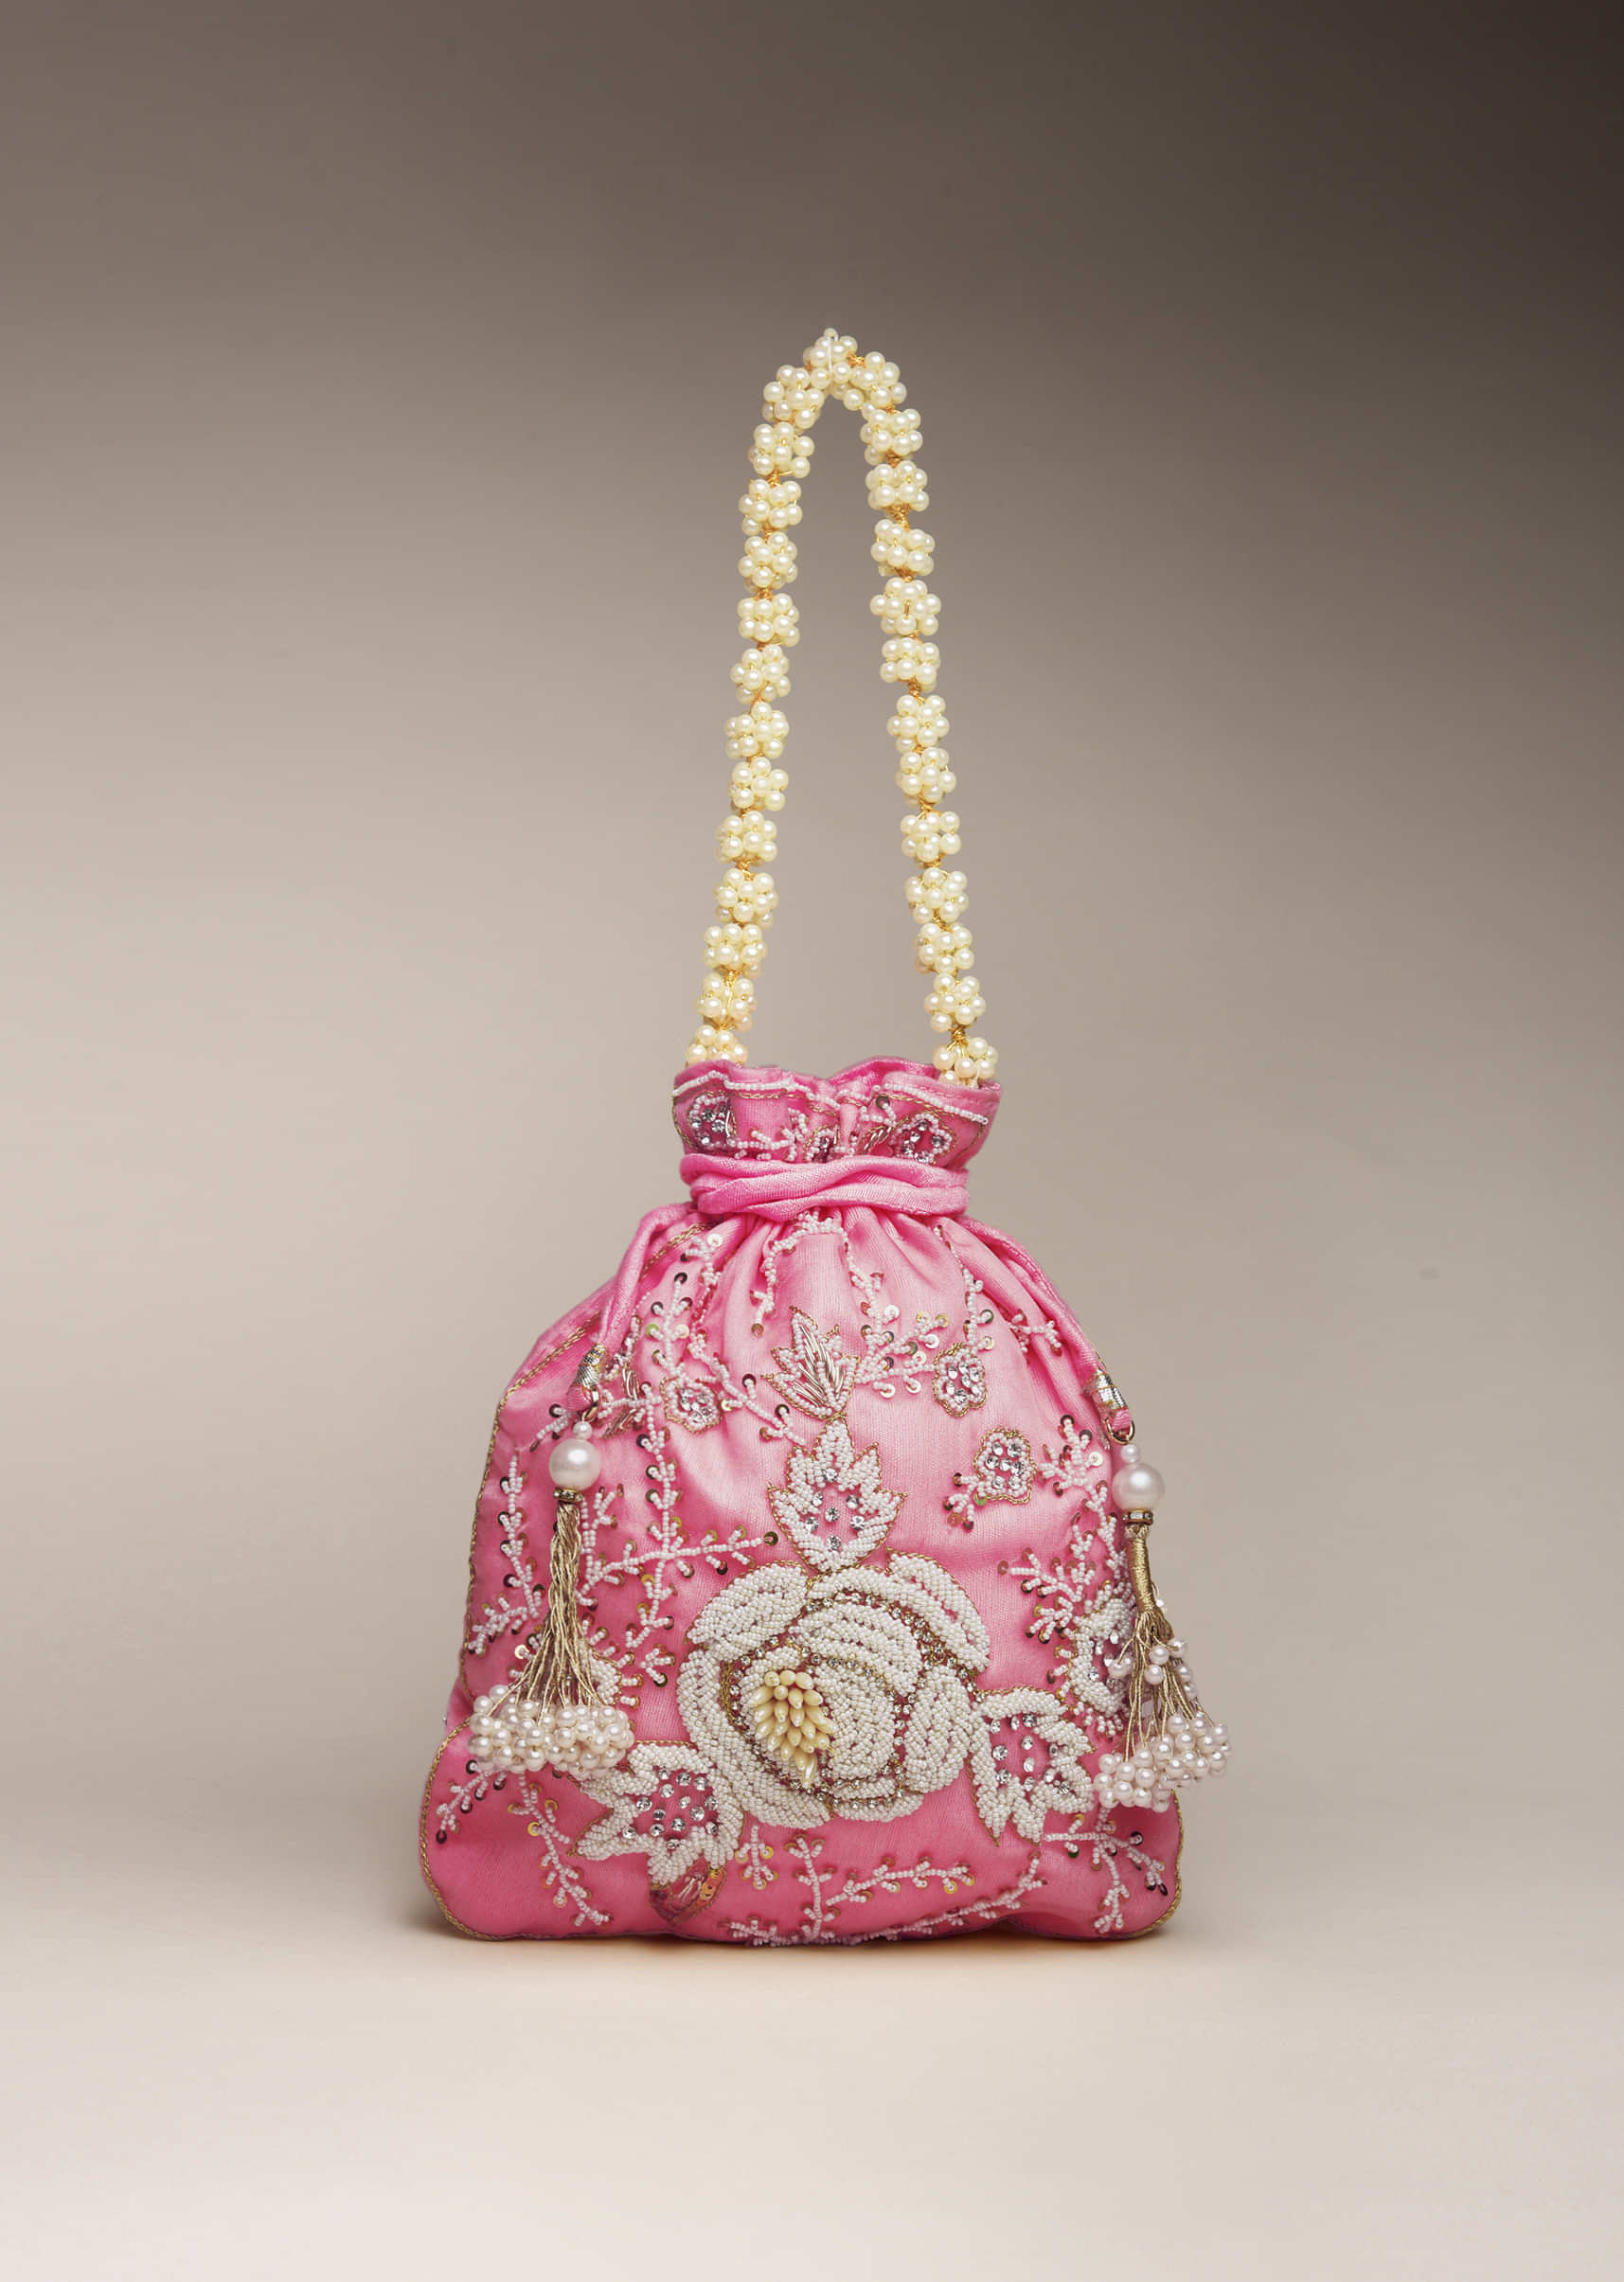 Salmon Pink Potli Bag In Raw Silk With Satin Moti Embroidery In Rose Motif And Floral Design